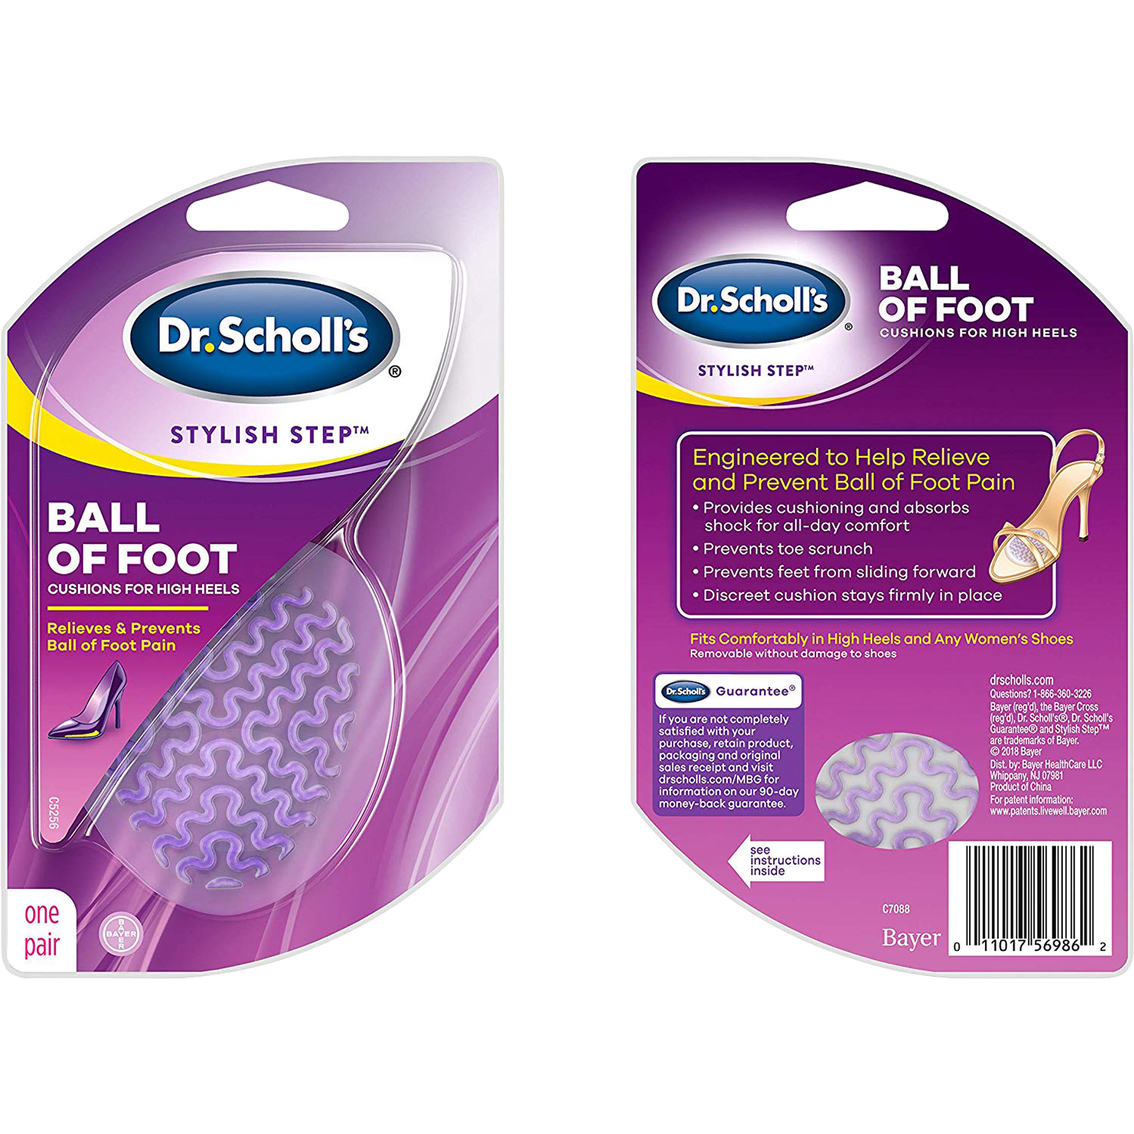 Dr. Scholl's Stylish Step Ball of Foot Cushions For High Heels - Image 2 of 3